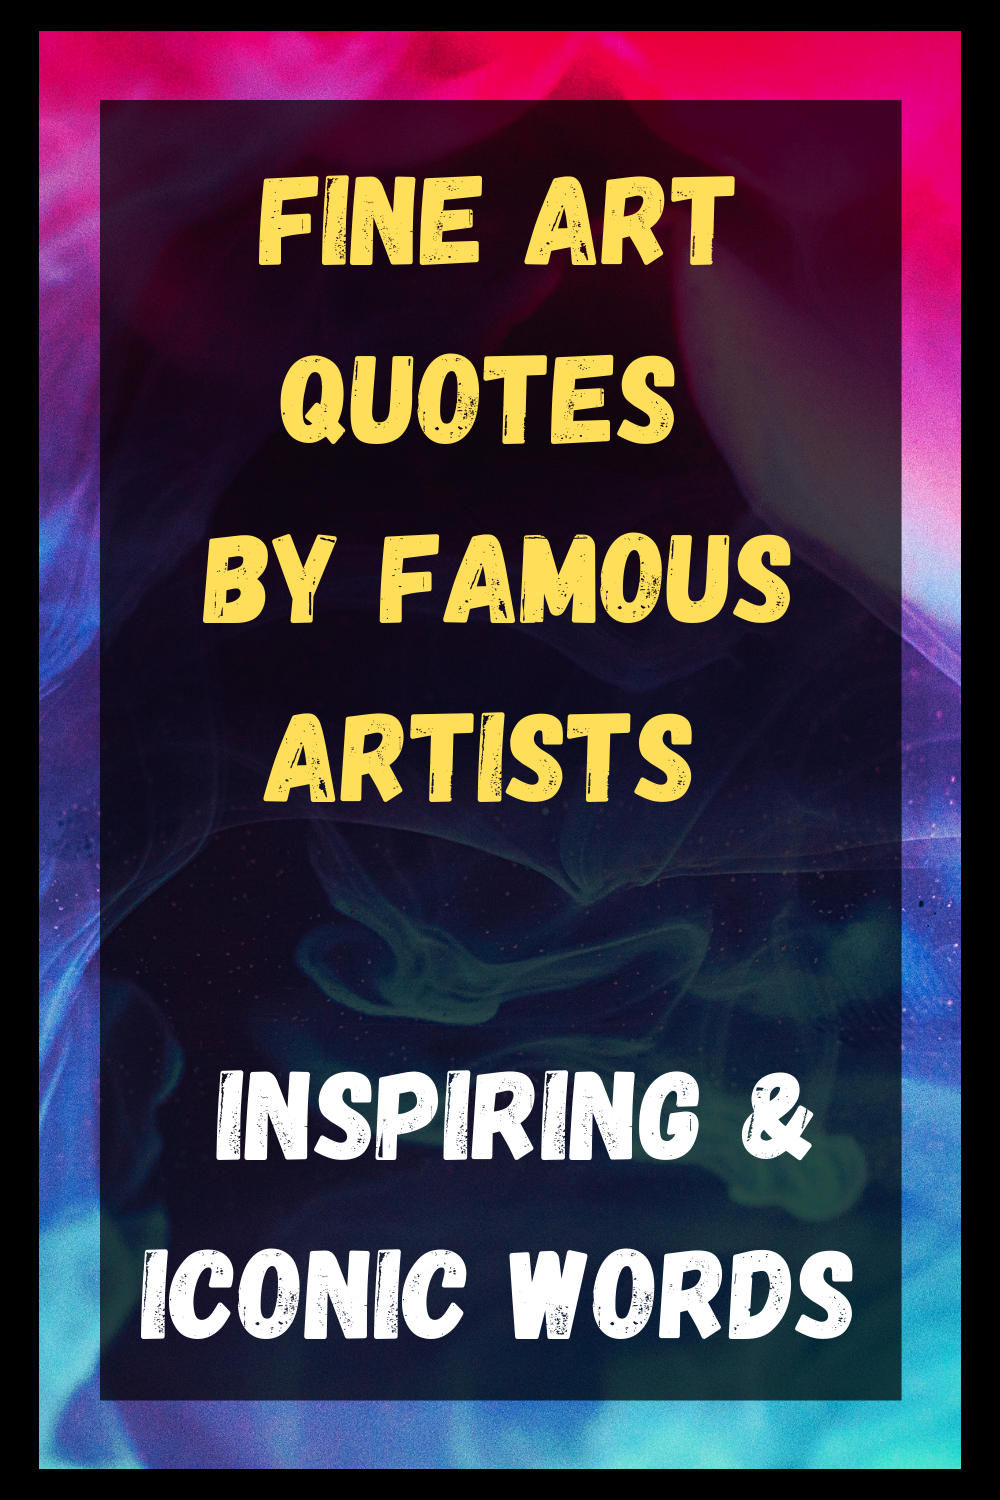 Fine Art Quotes By Famous Artists - Inspiring & Iconic Words